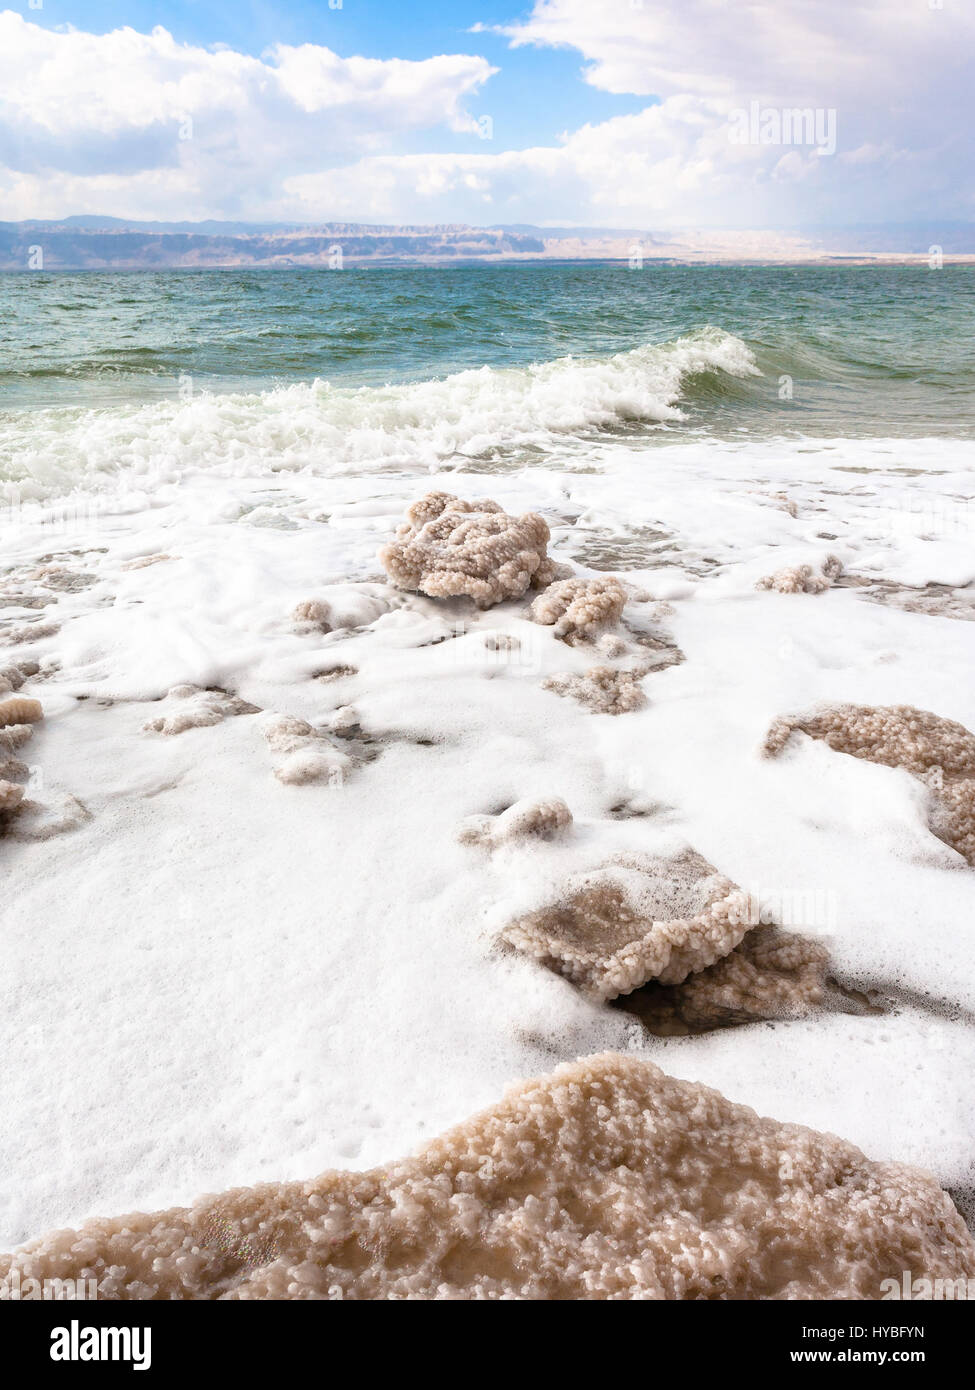 Travel to Middle East country Kingdom of Jordan - pieces of crystalline salt on shore of Dead Sea in winter Stock Photo